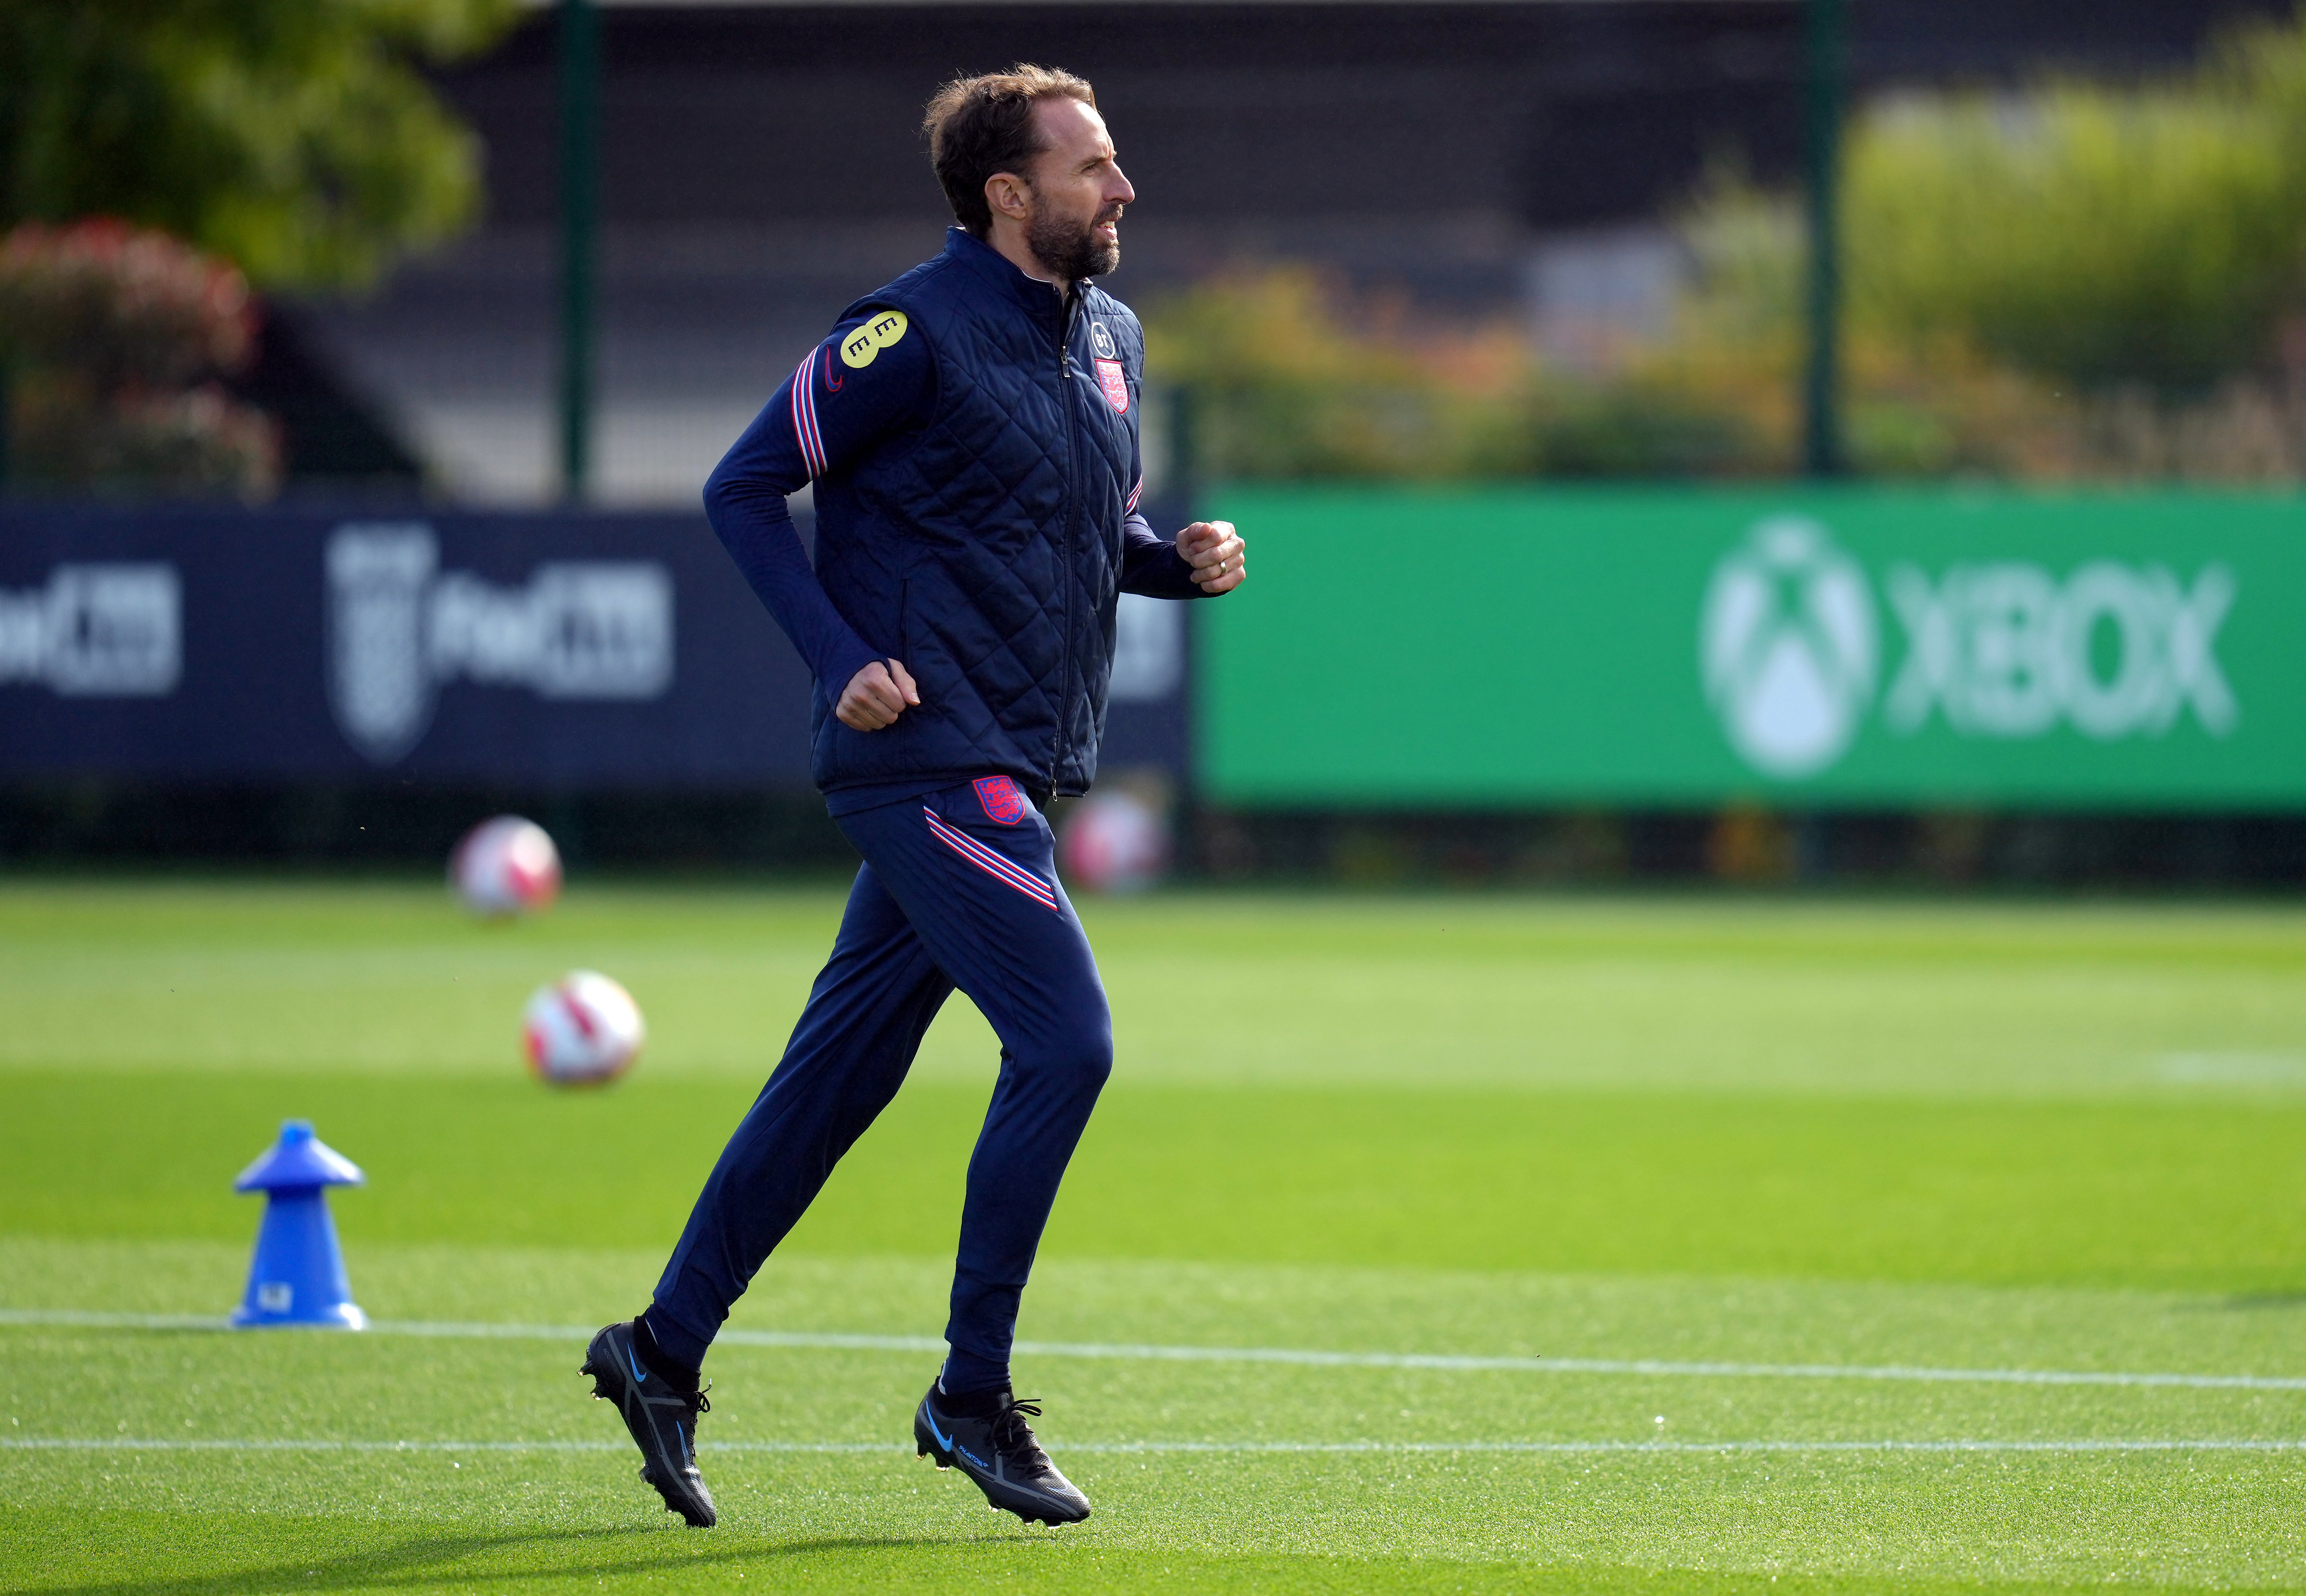 Gareth Southgate says it’s “very difficult” to name each squad due to the quality at his disposal (John Walton/PA)